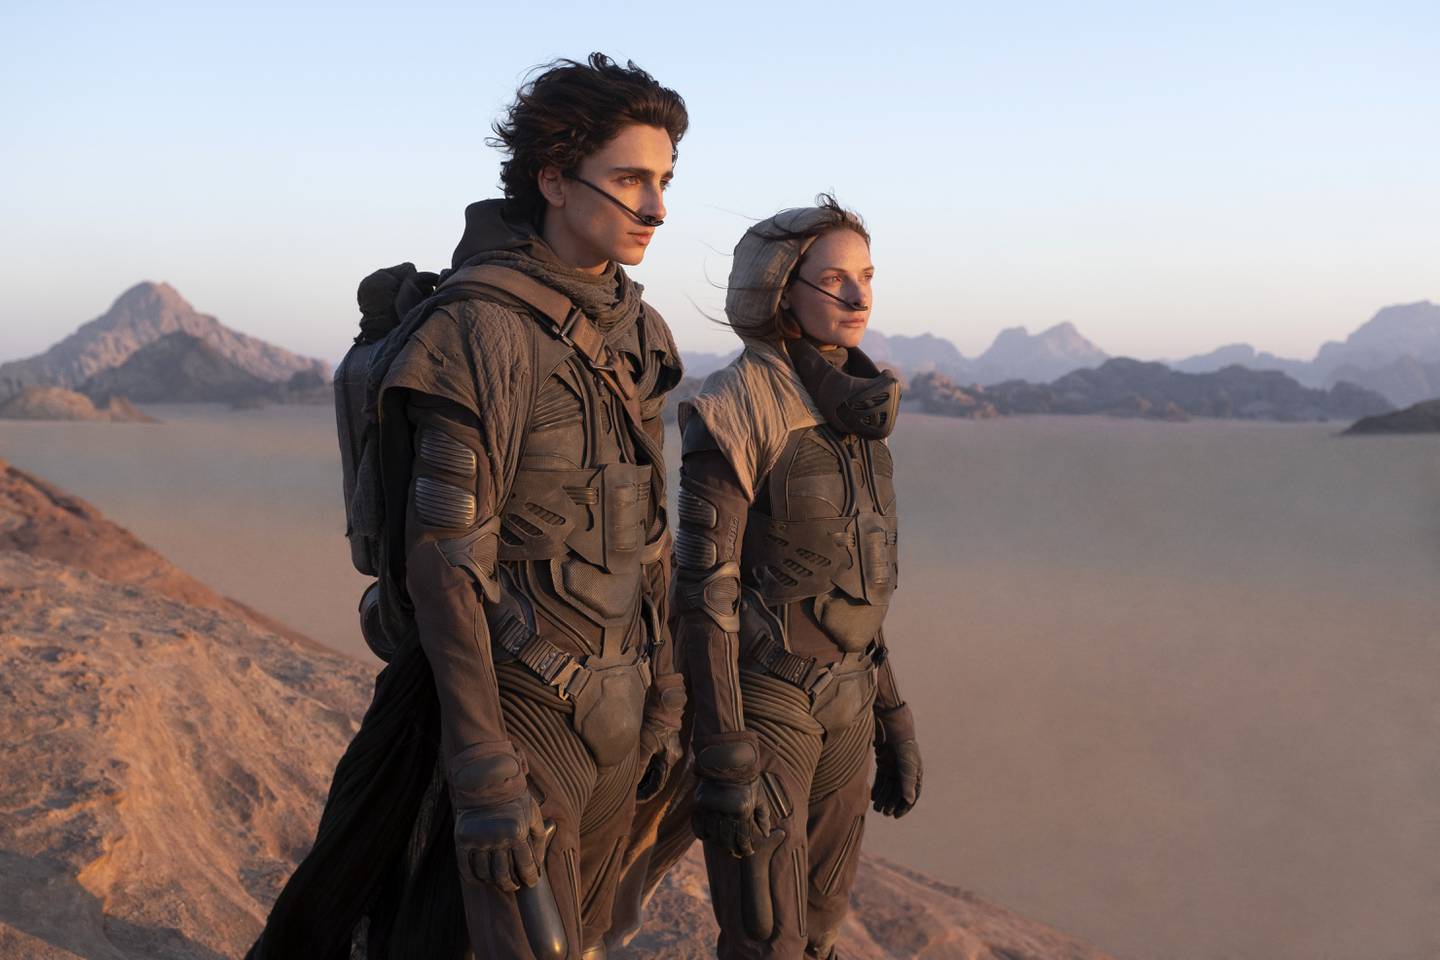 Timothee Chalamet and Rebecca Ferguson in 'Dune', which was partly filmed in Abu Dhabi. Photo: Warner Bros. Pictures 